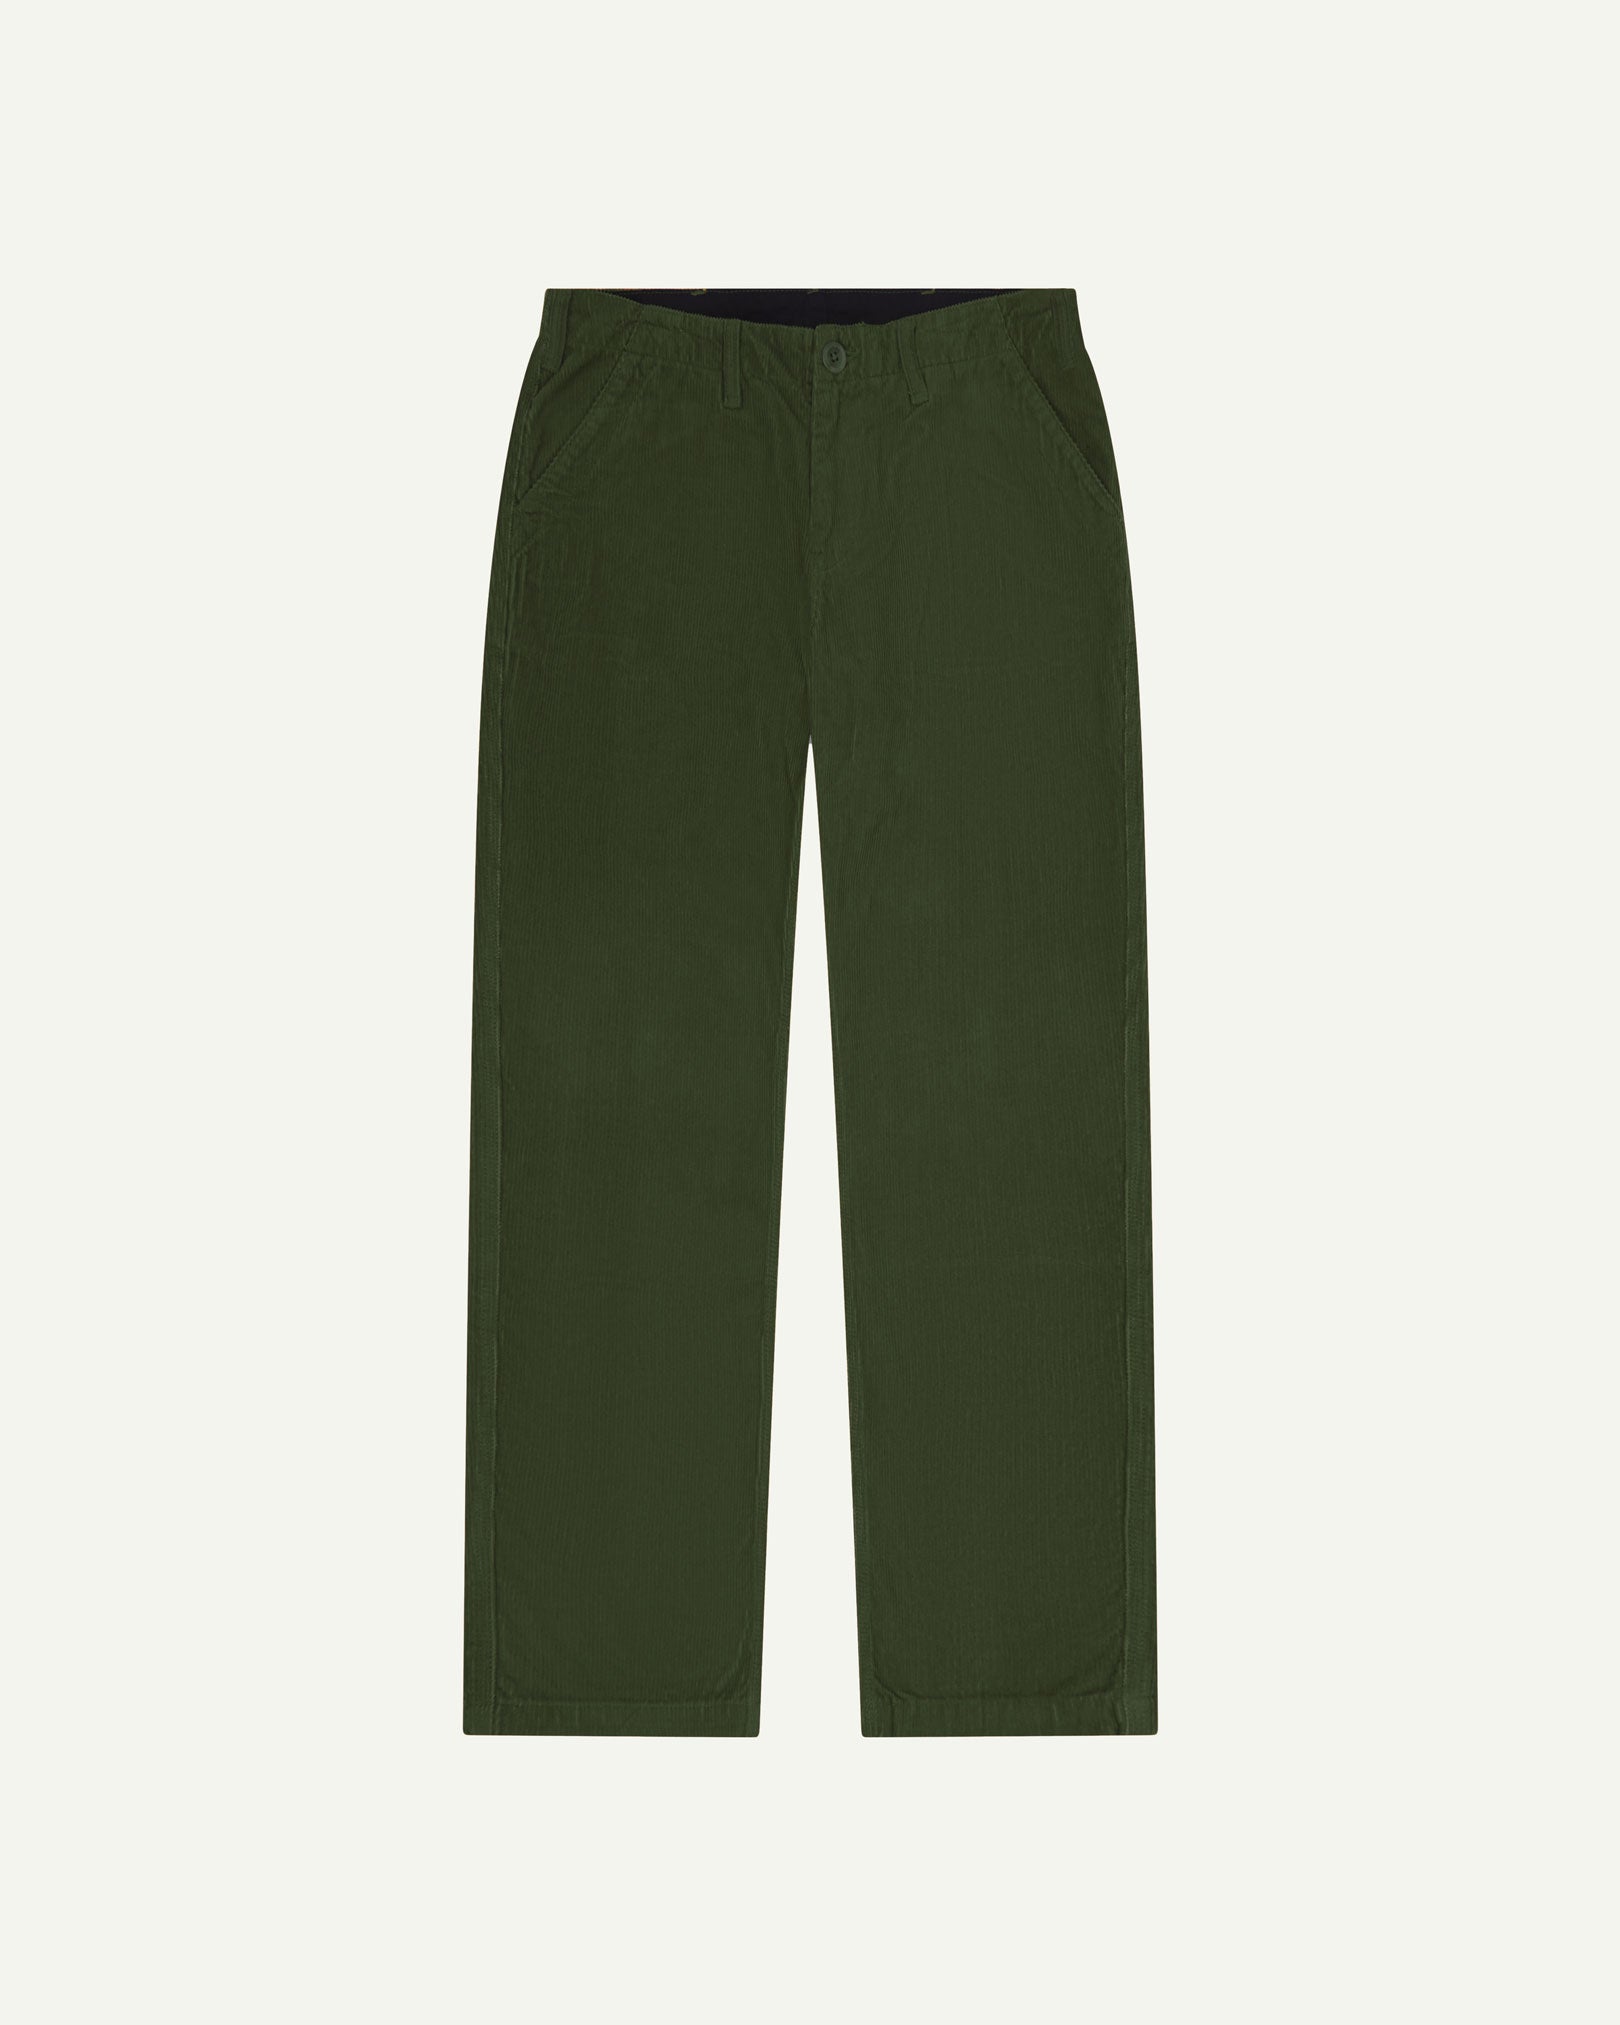 Front flat view of 5005 Uskees men's organic corduroy 'coriander' casual trousers with view of YKK zip fly and Corozo buttons.